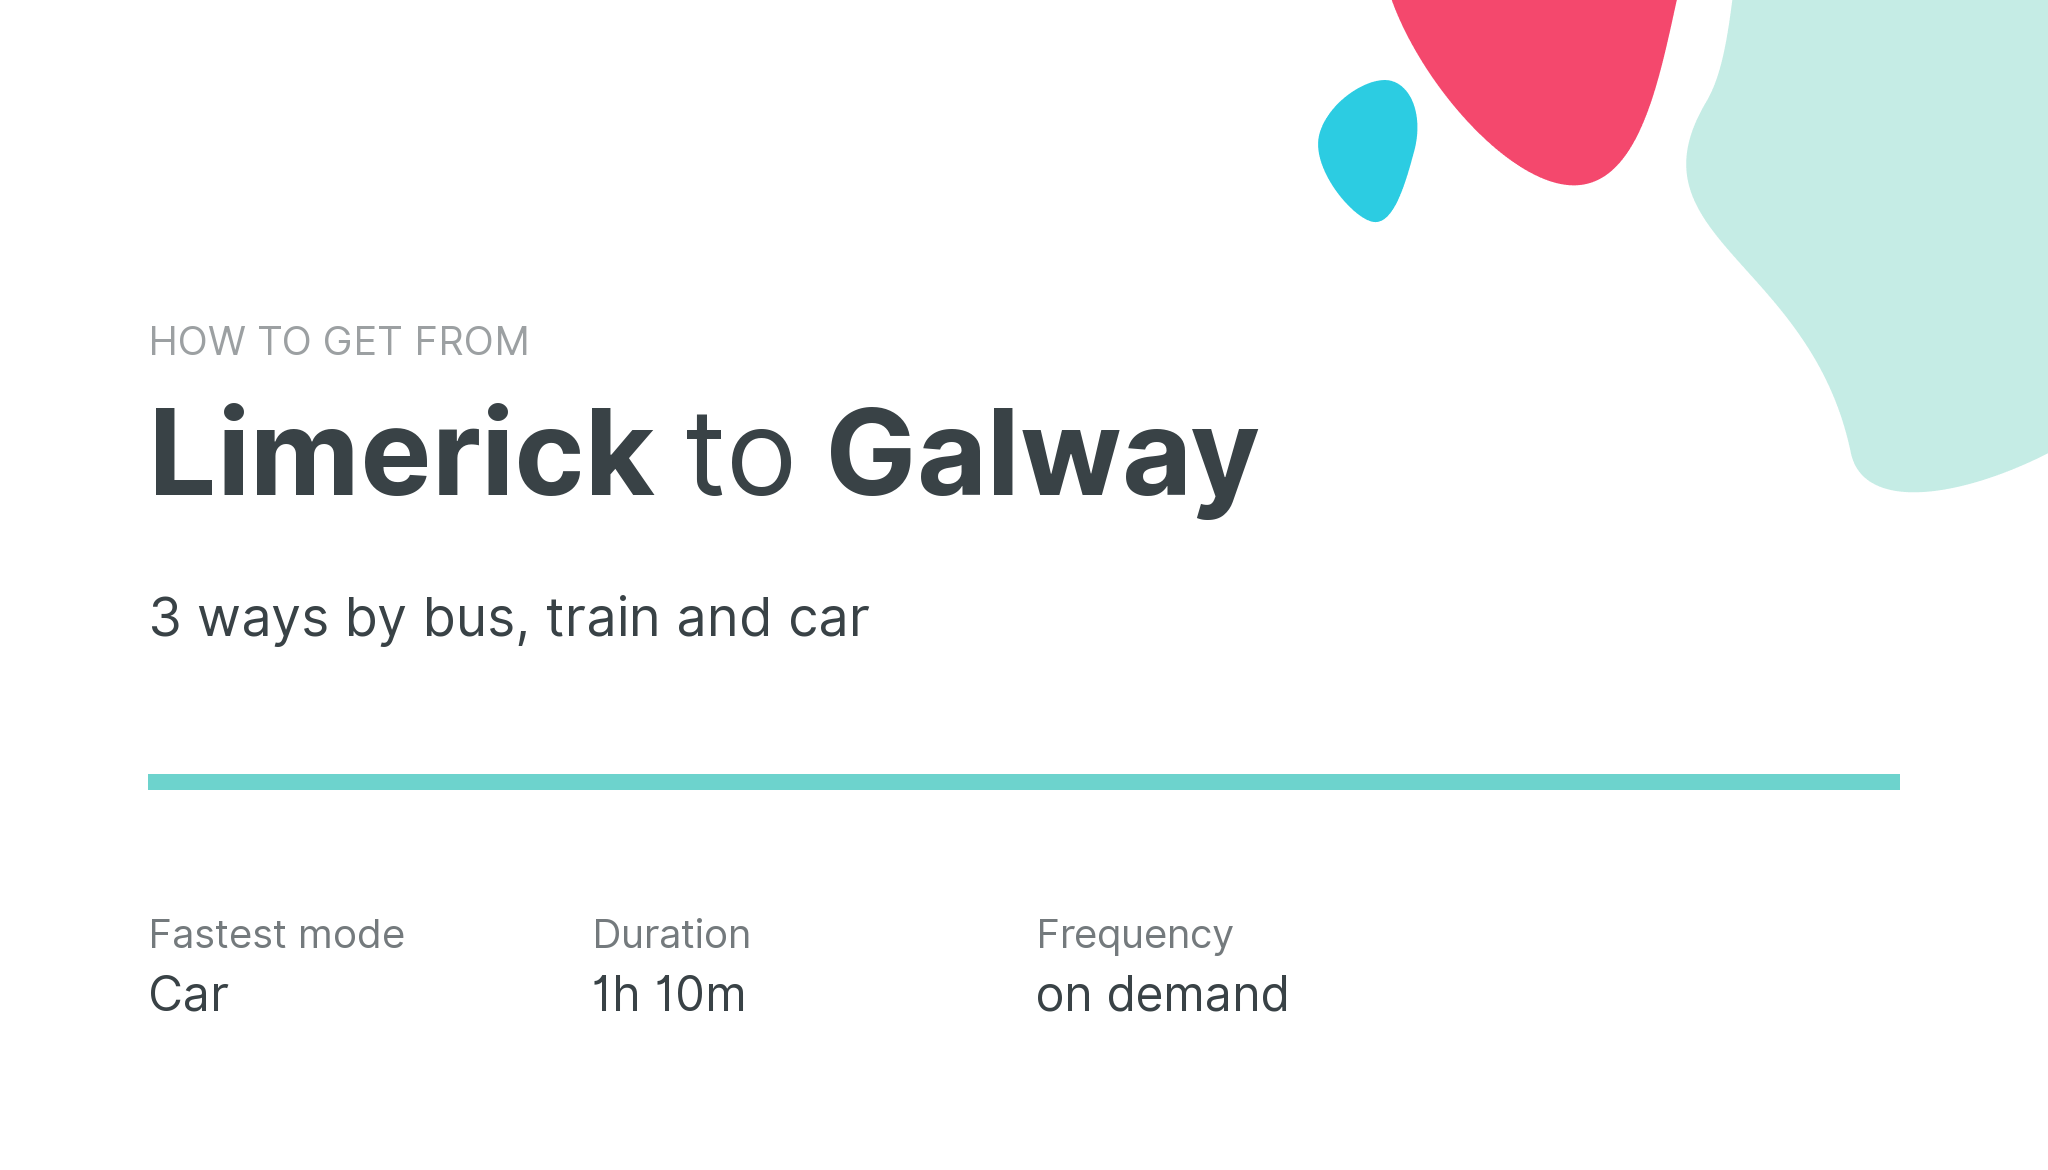 How do I get from Limerick to Galway